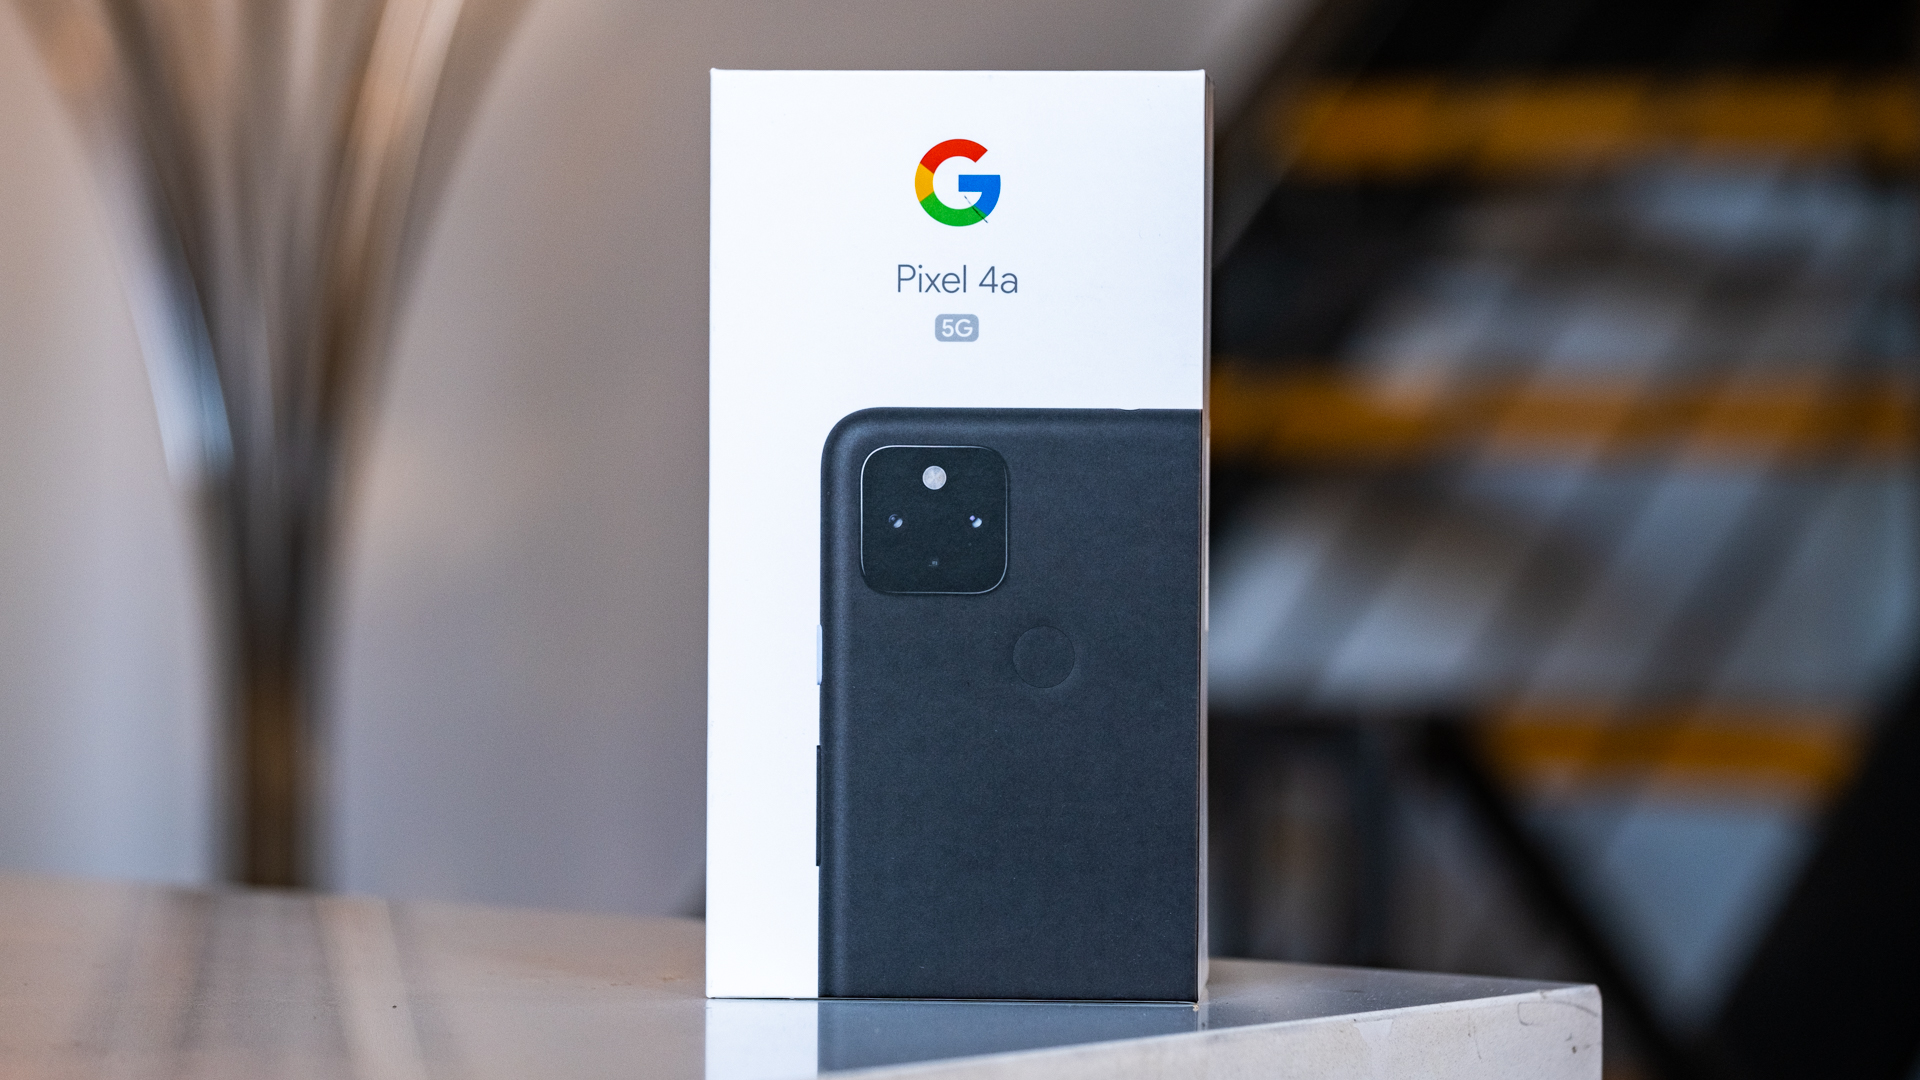 Google Pixel 4a 5G unboxing and hands-on: The Goldilocks Google phone? -  Android Authority